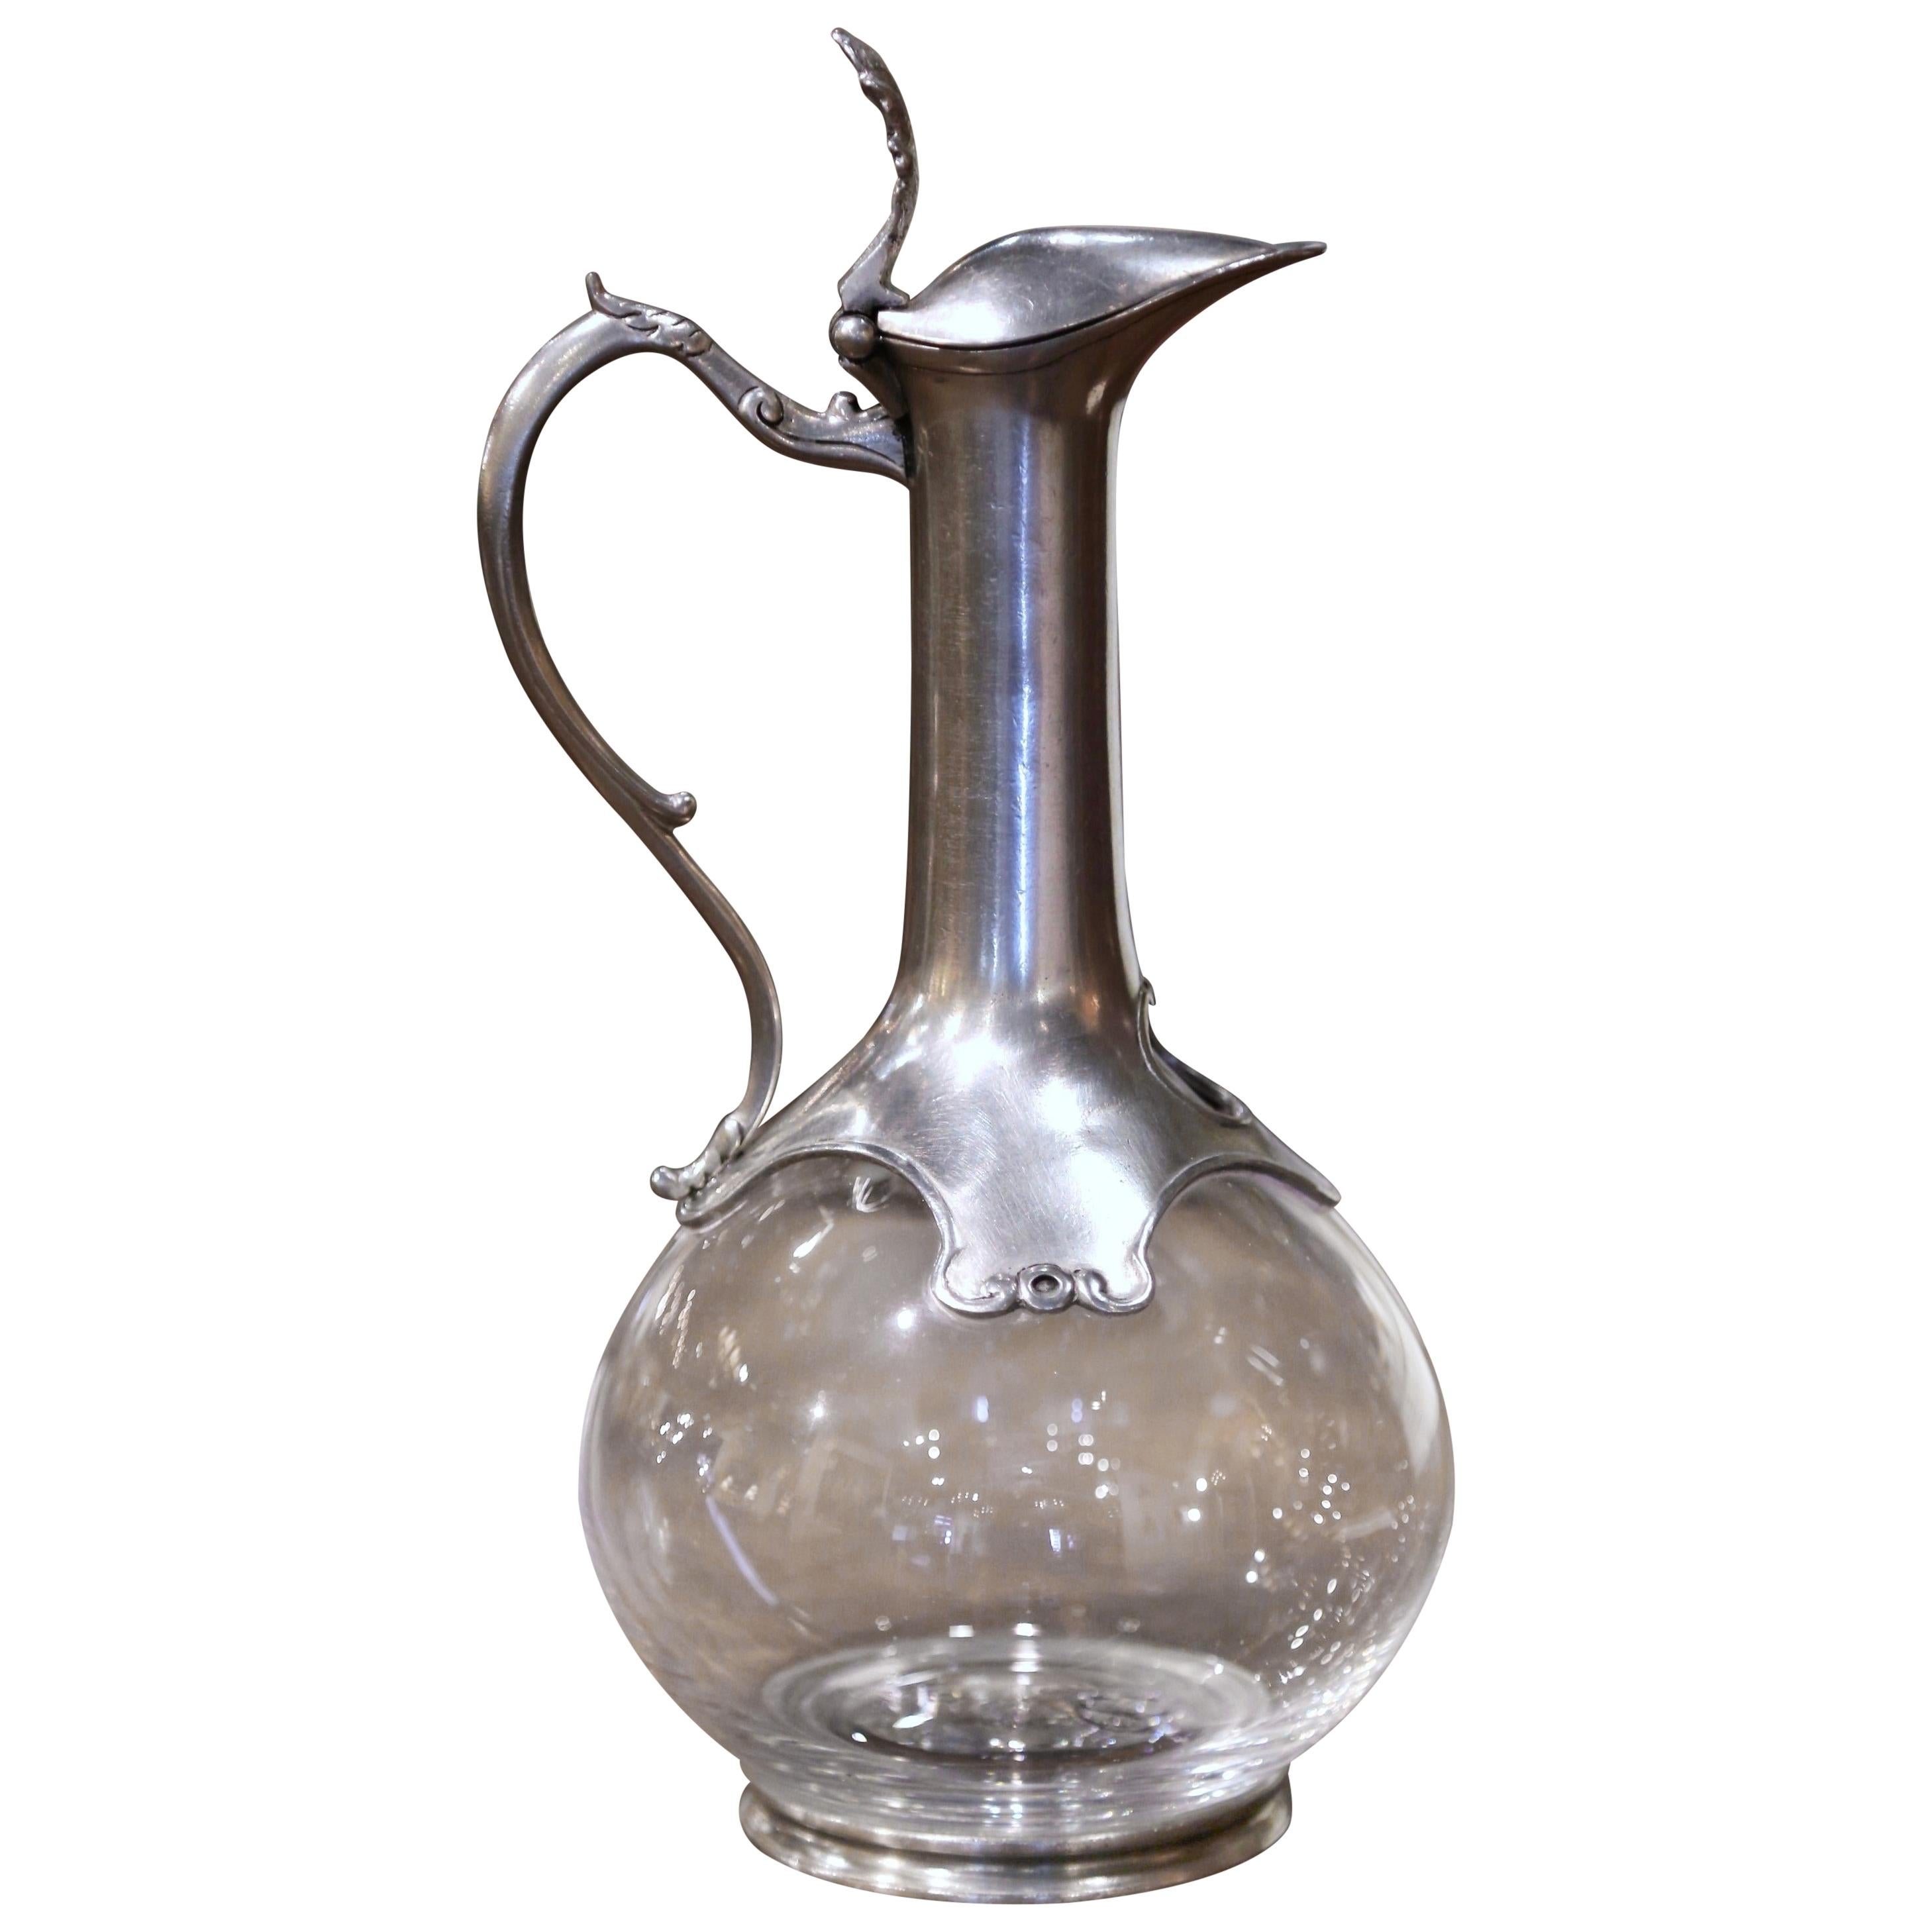 https://a.1stdibscdn.com/mid-century-french-crystal-and-pewter-wine-carafe-with-acanthus-leaf-decor-for-sale/1121189/f_241905421626374416521/24190542_master.jpeg